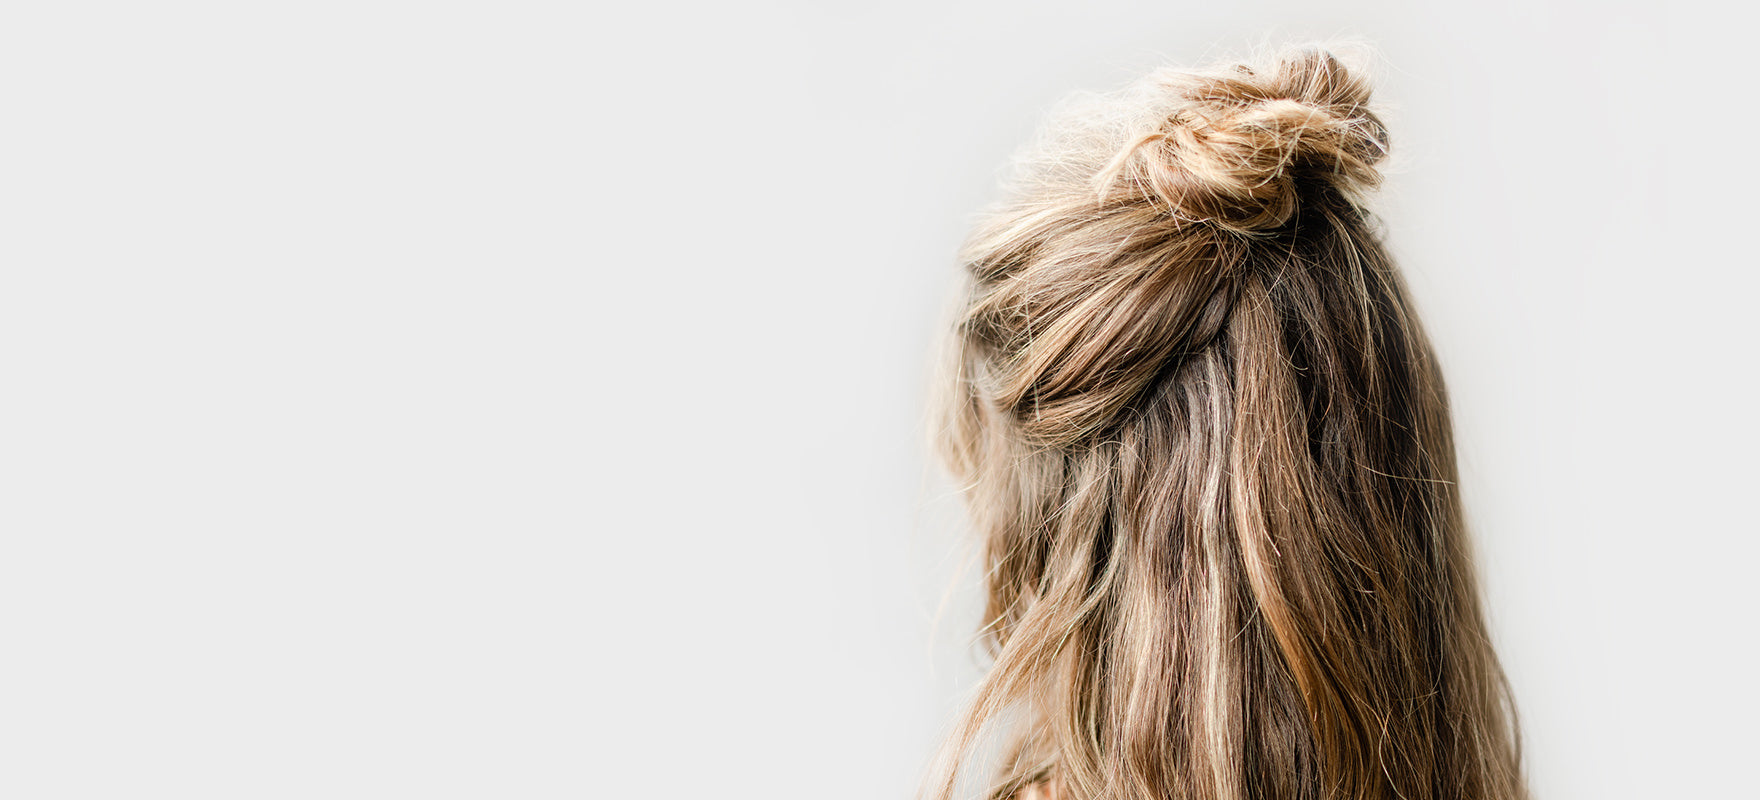 Hair tousled and half up in chic messy top knot as part of rocky Mountain Soap Company's hassle-free holiday hairstyle guide.  